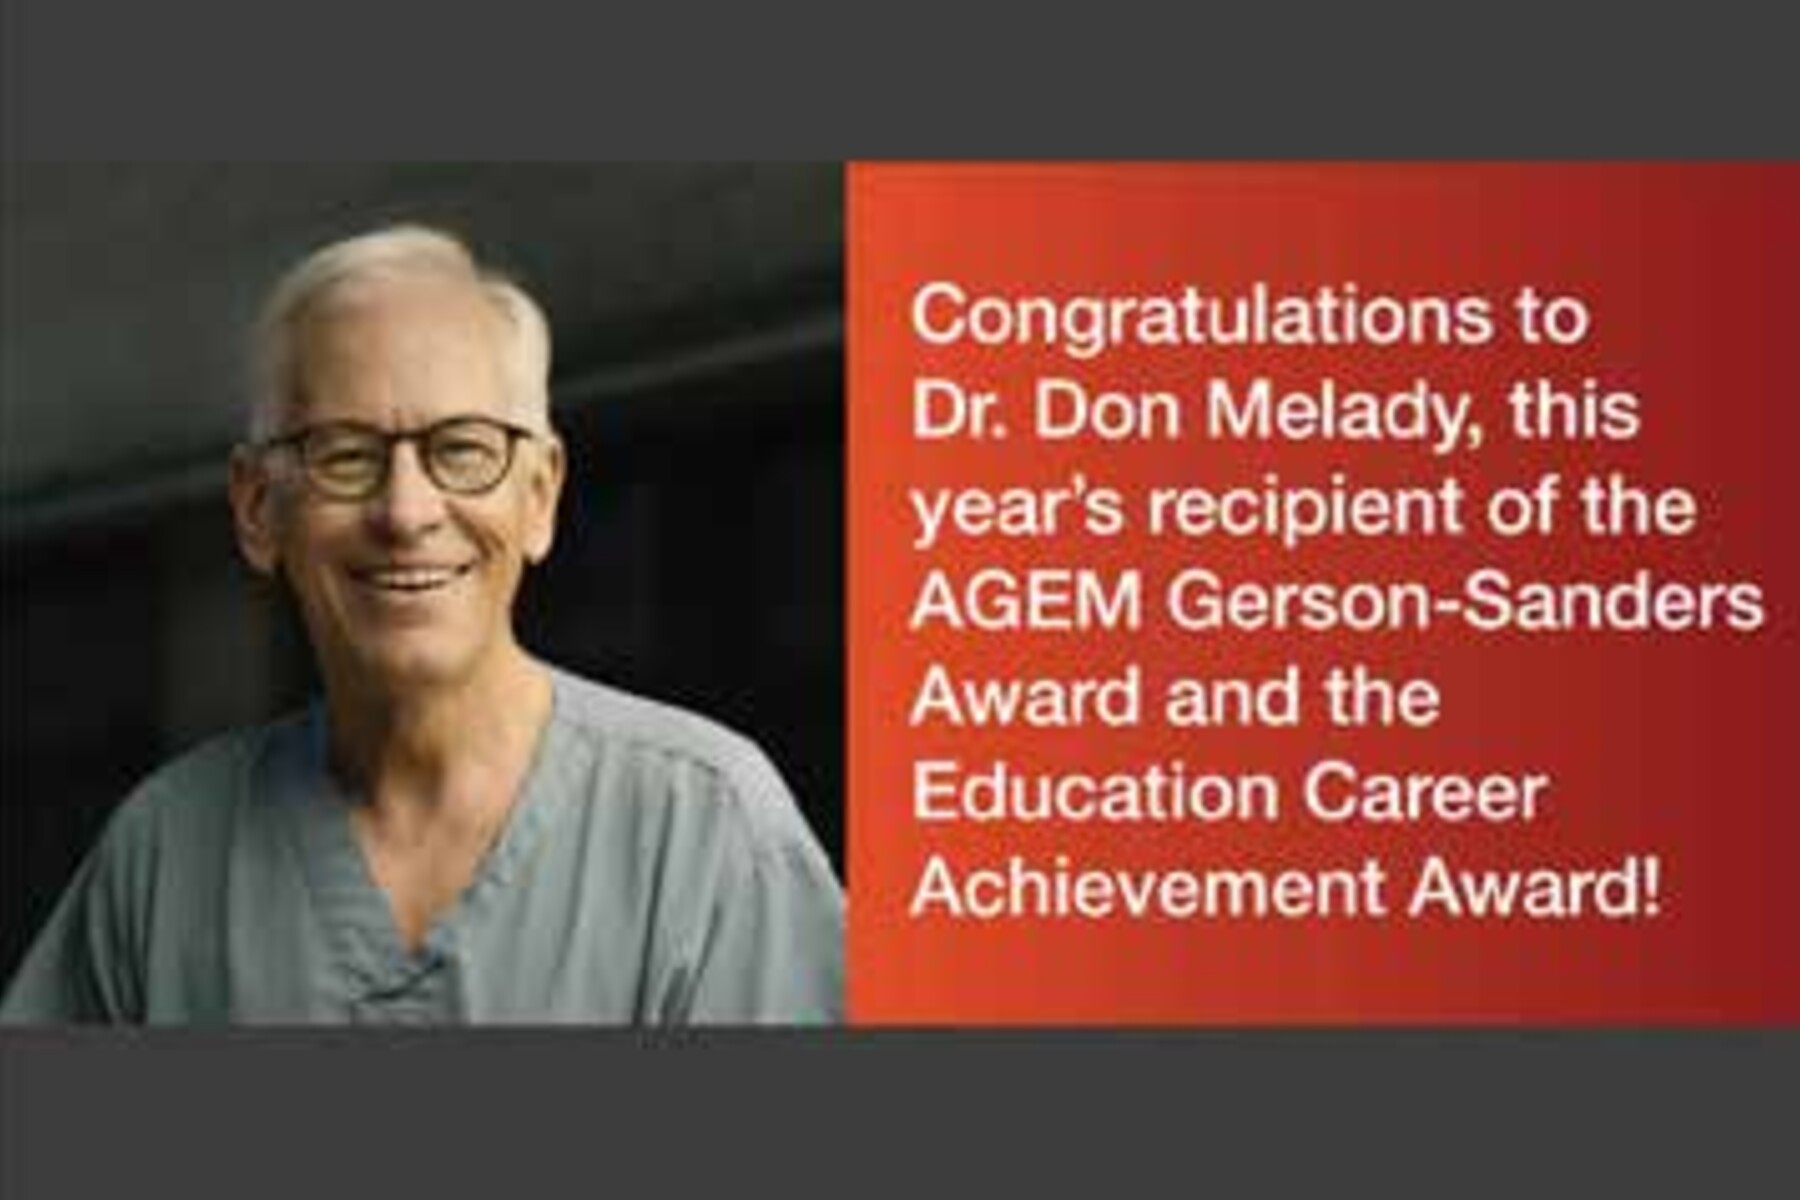 Image of Don Melady and text 'Congratulations to Dr. Don Melady, this year's recipient of the AGEM Gerson-Sanders Award and the Education Career Achievement Award!'